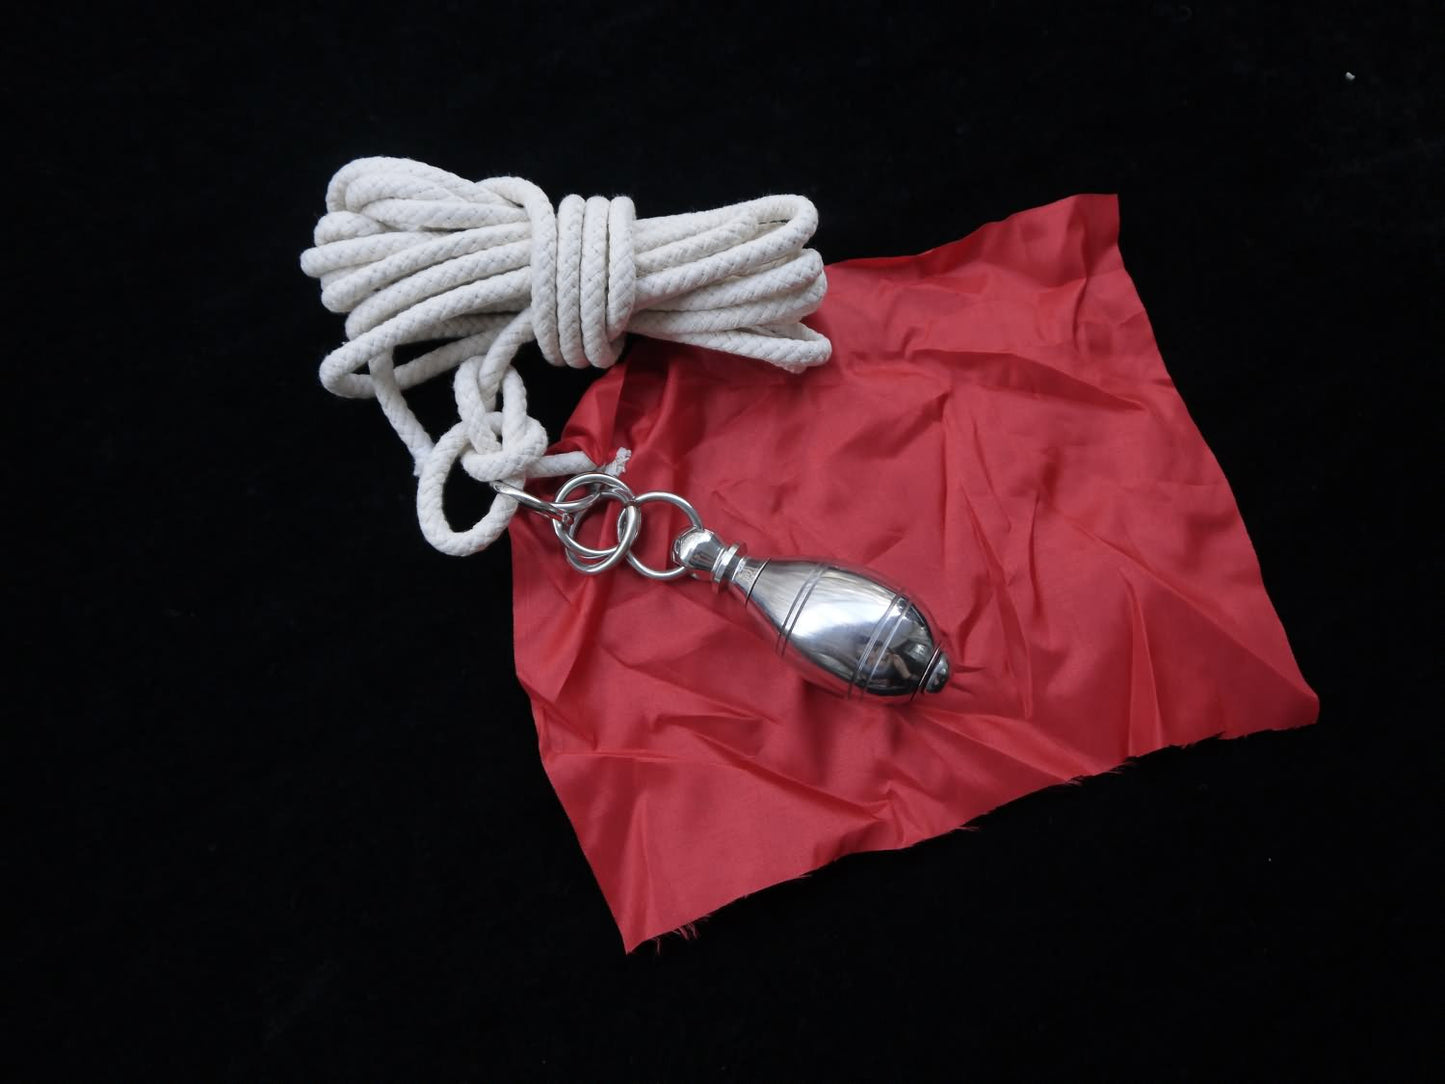 Meteor Hammer/Stainless steel/Rope 4M/Chinese martial arts/Kung fu - Chinese sword shop